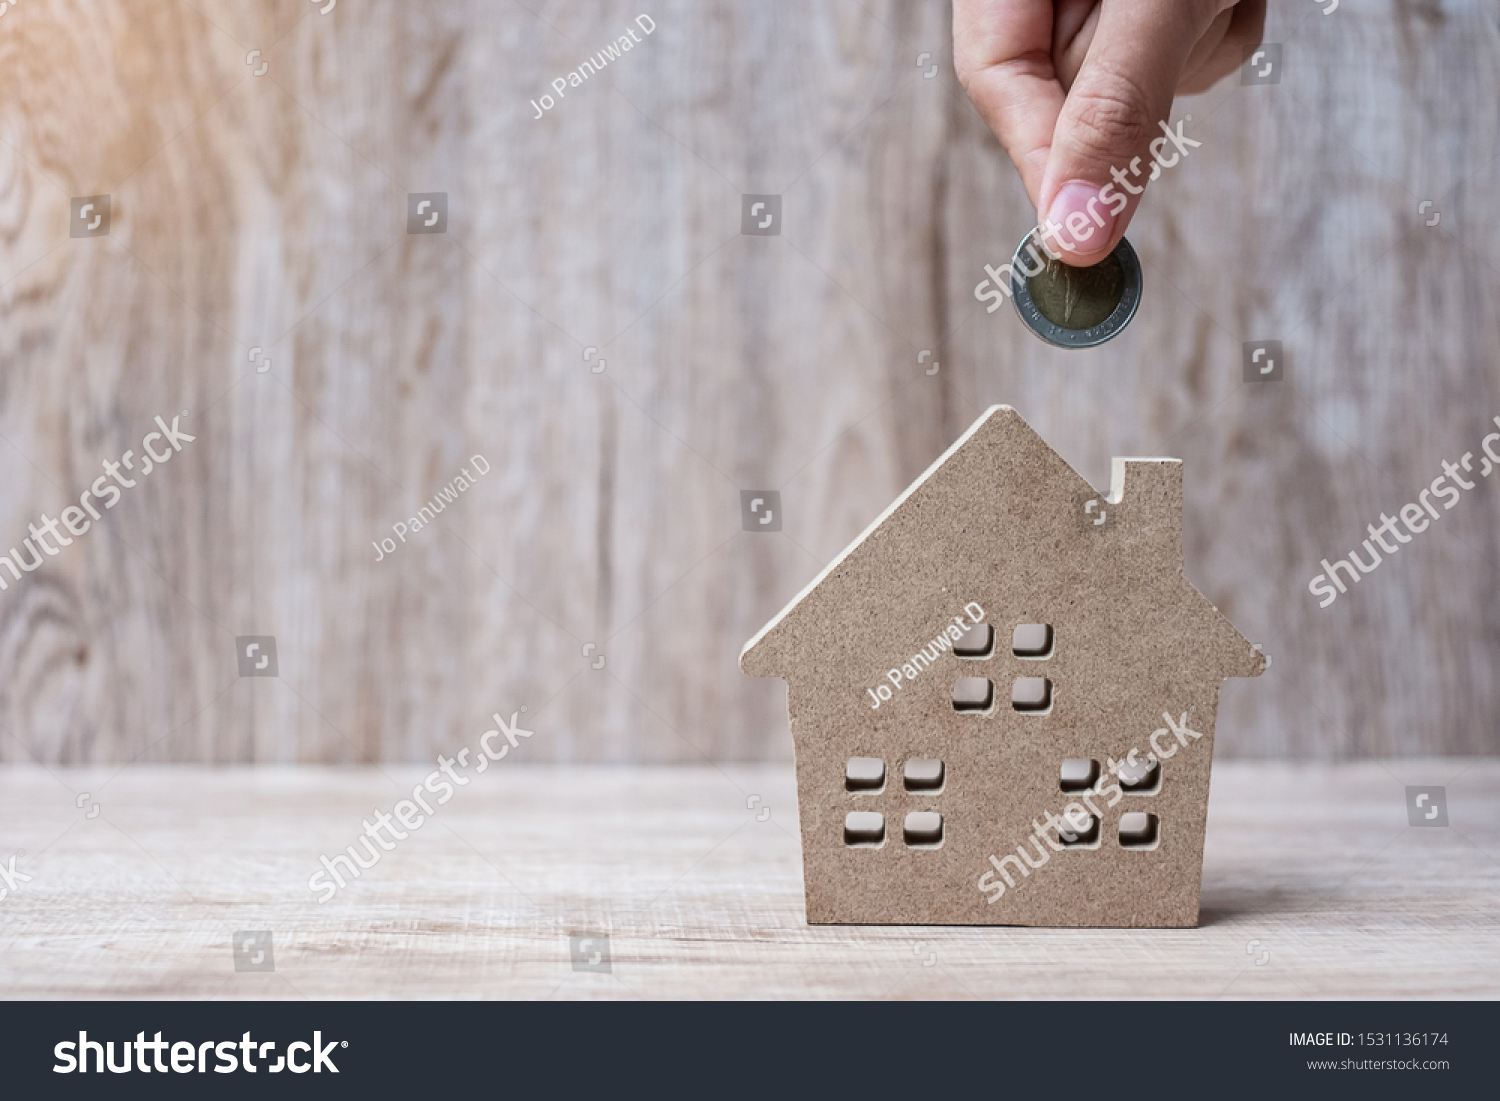 Man hand putting coin over house model on wooden background. Banking, real estate, investment, success, financial and savings concepts #1531136174